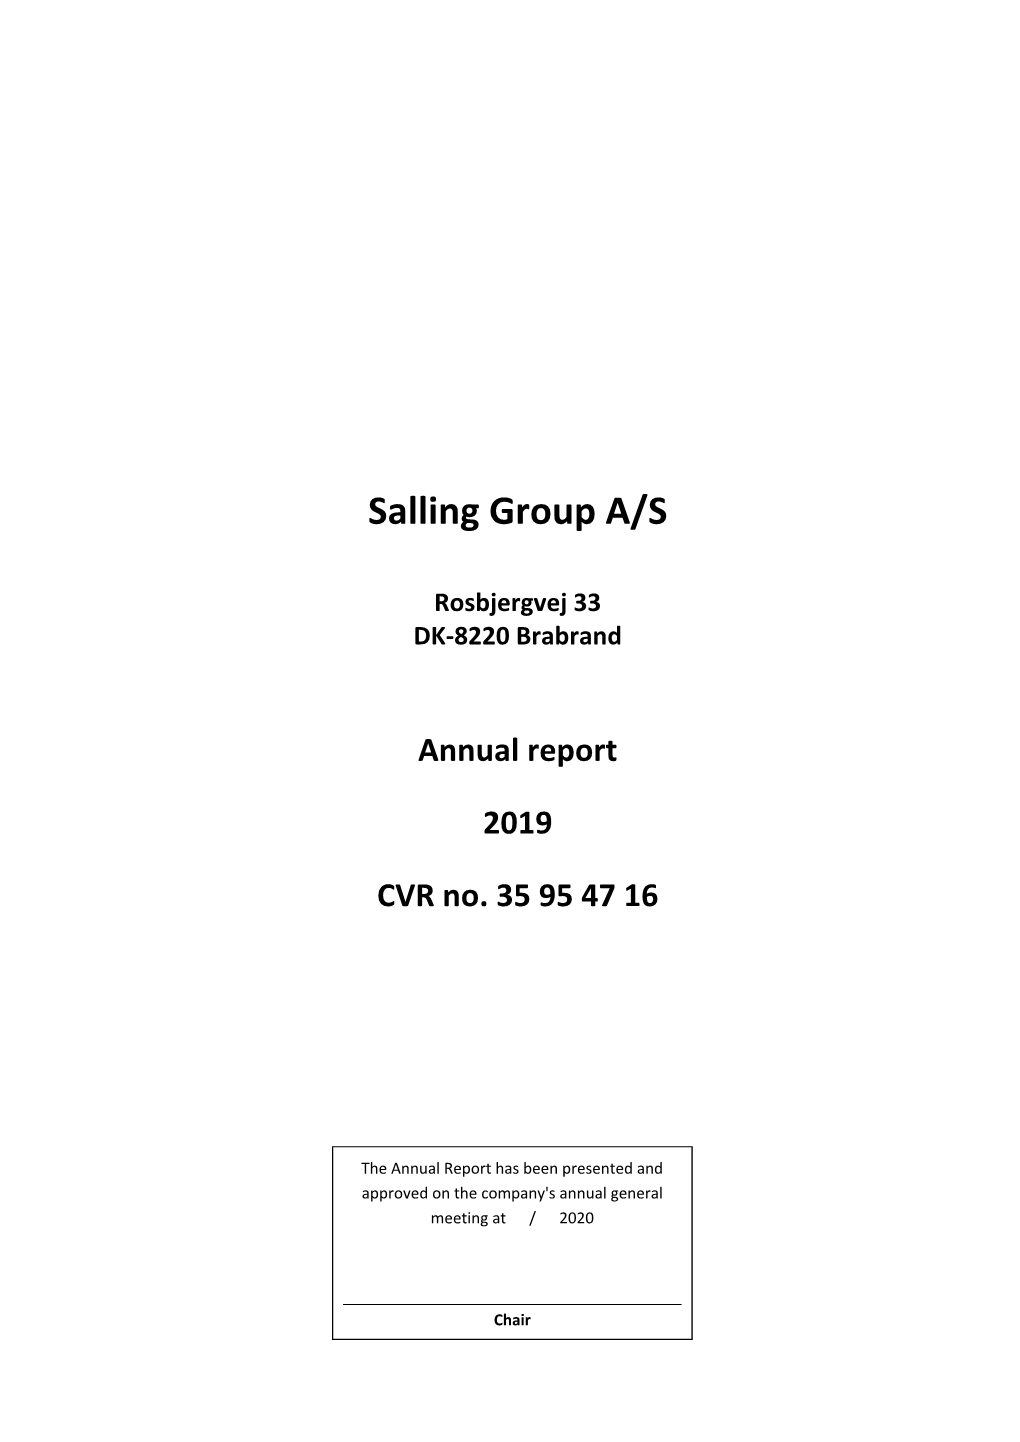 Salling-Group-Annual-Report-2019.Pdf